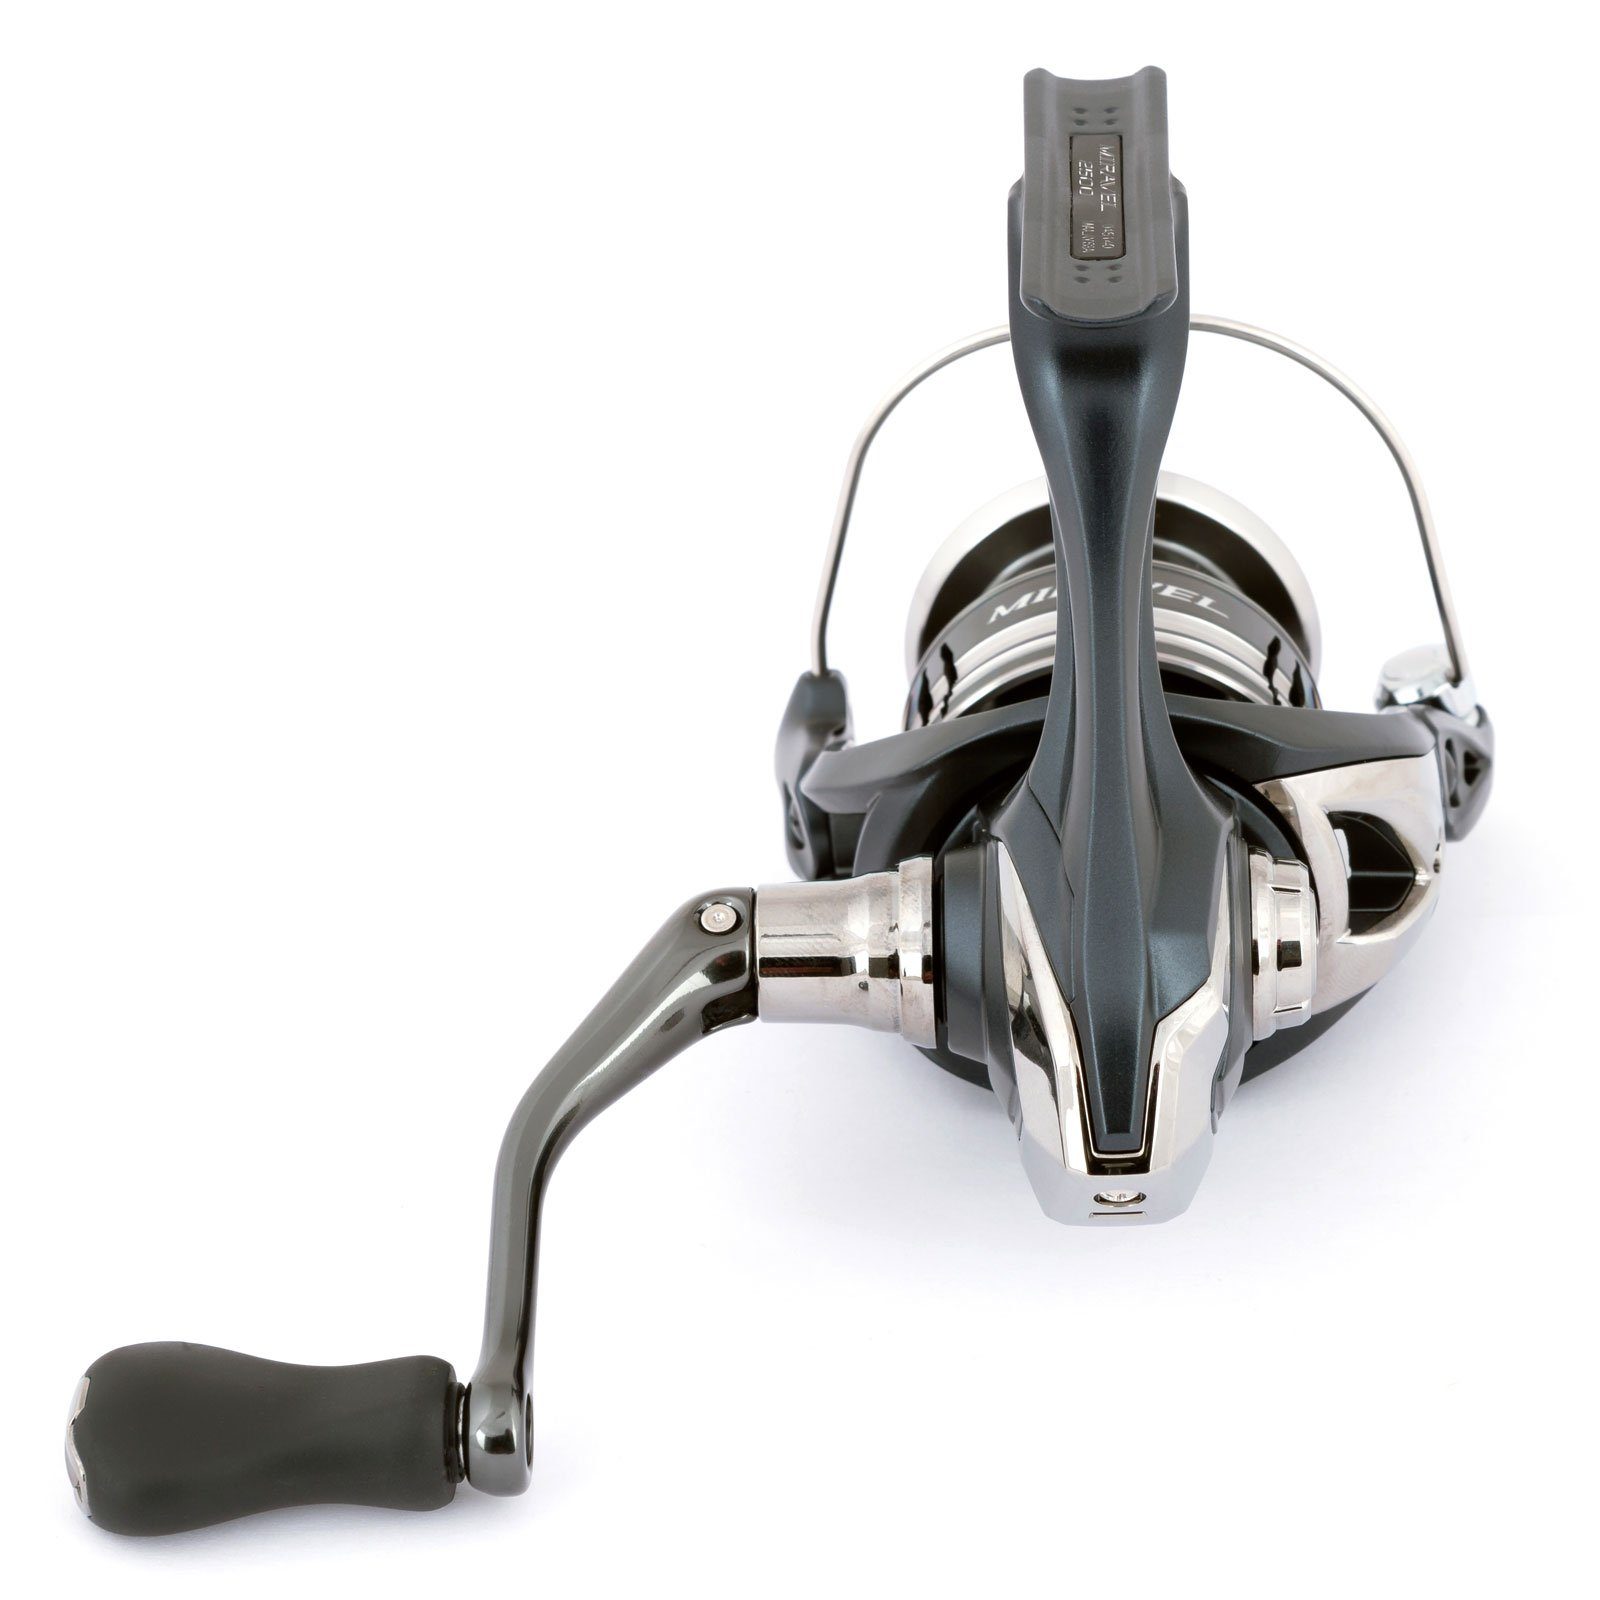 Angelrolle Miravel Shimano Spinnrolle), Shimano 2500 Spinnrolle